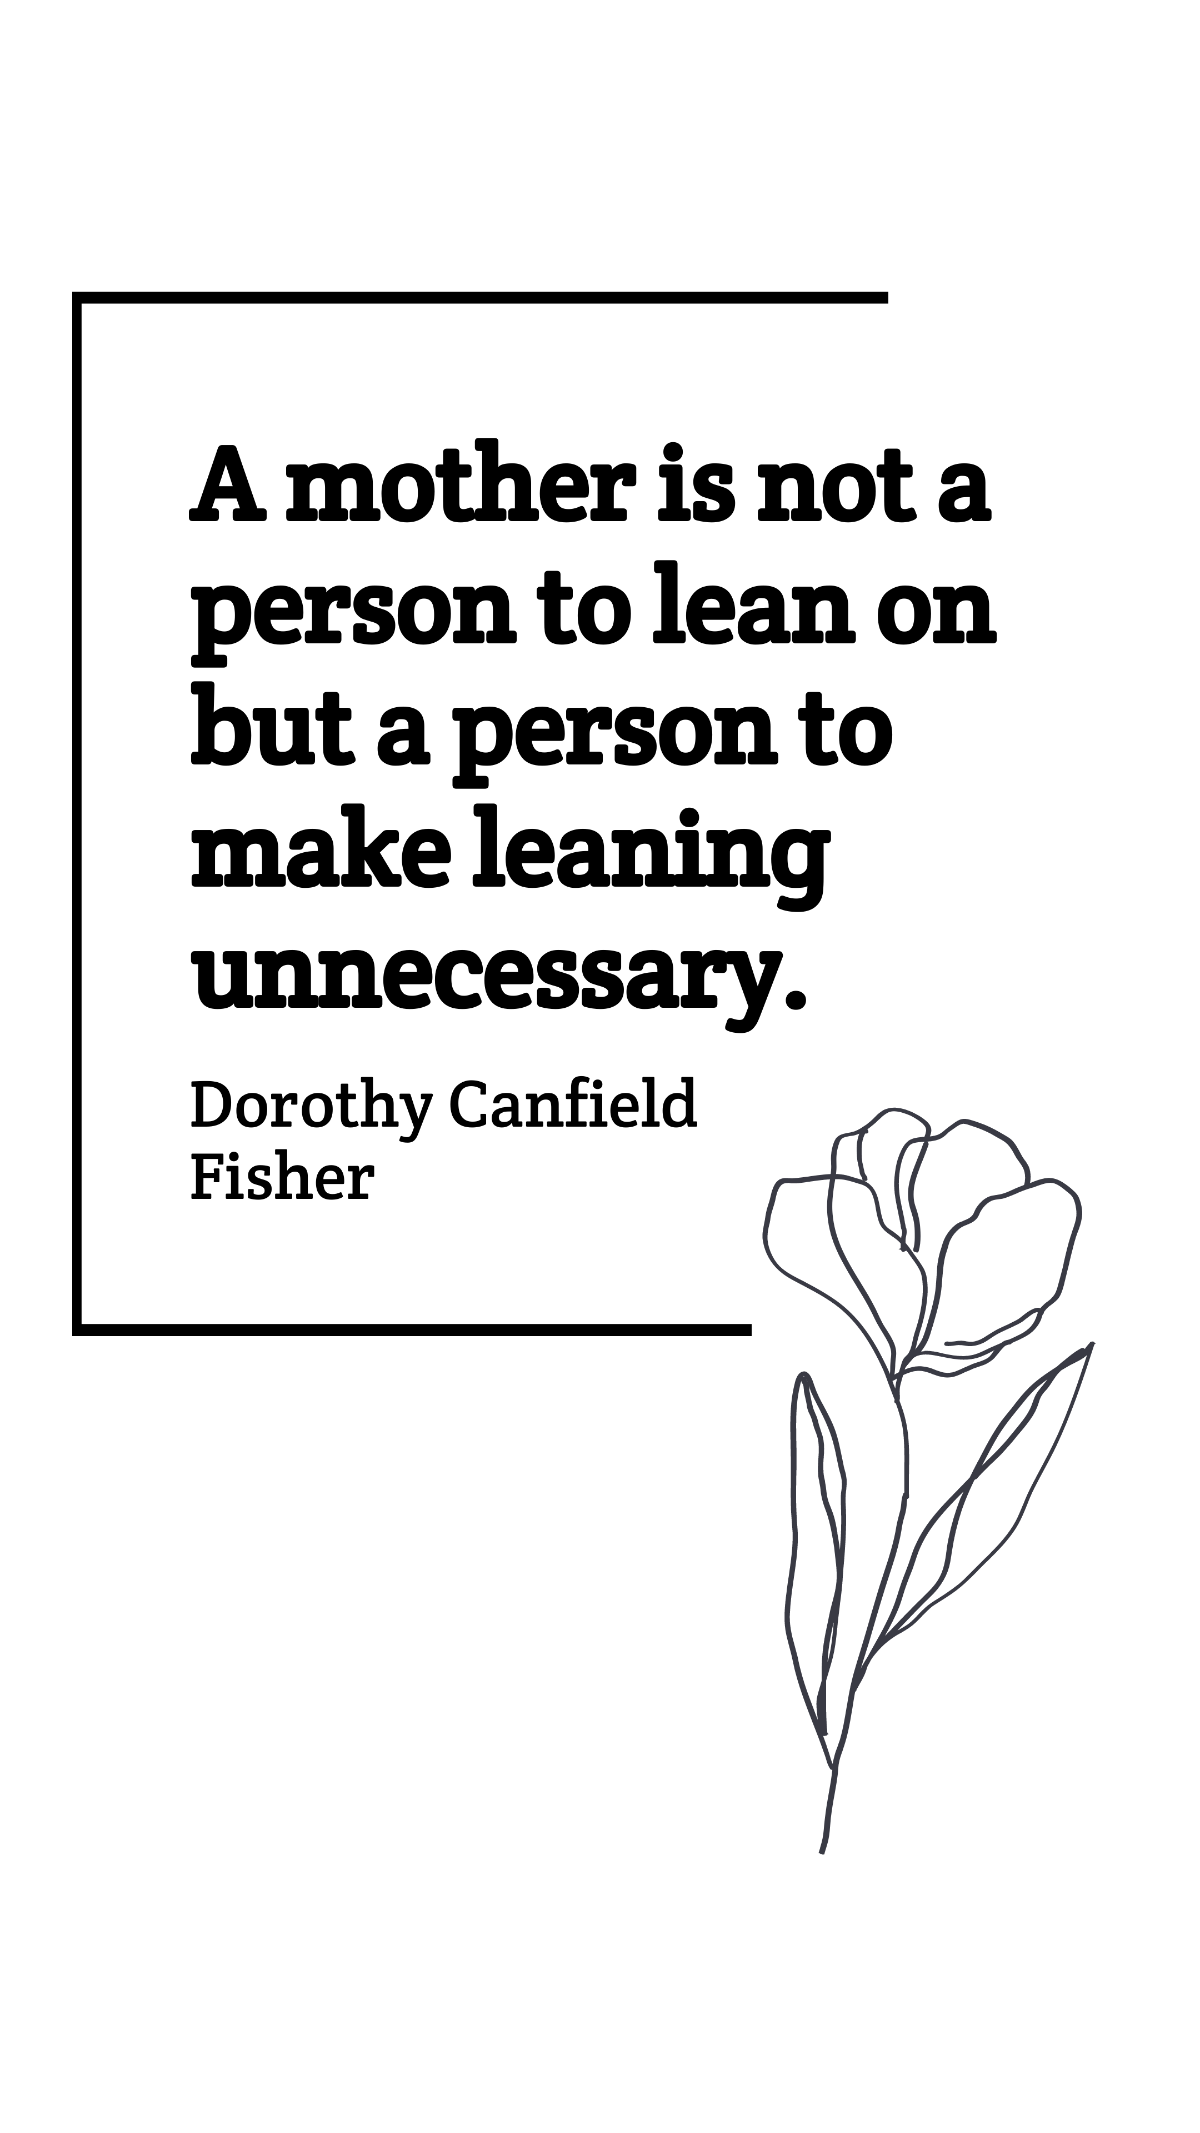 Dorothy Canfield Fisher - A mother is not a person to lean on but a person to make leaning unnecessary. Template